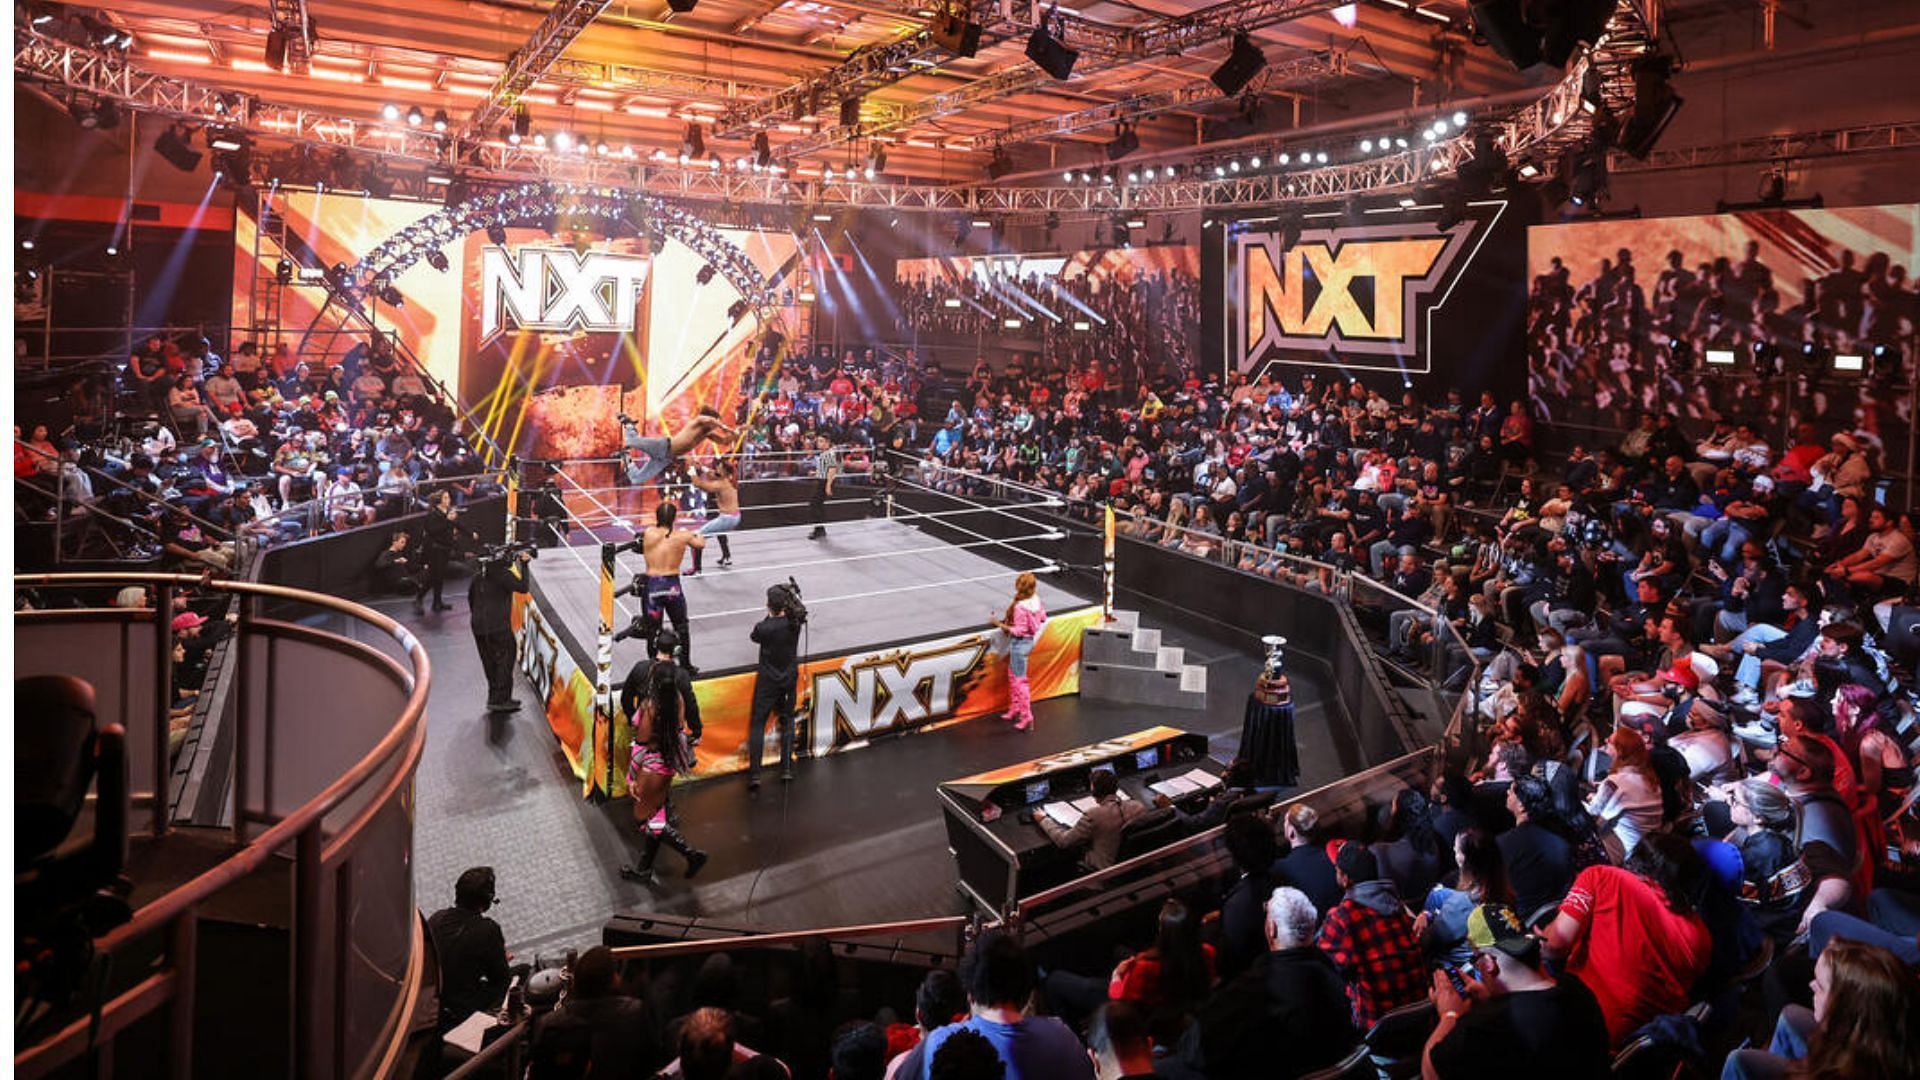 NXT will air live later tonight.